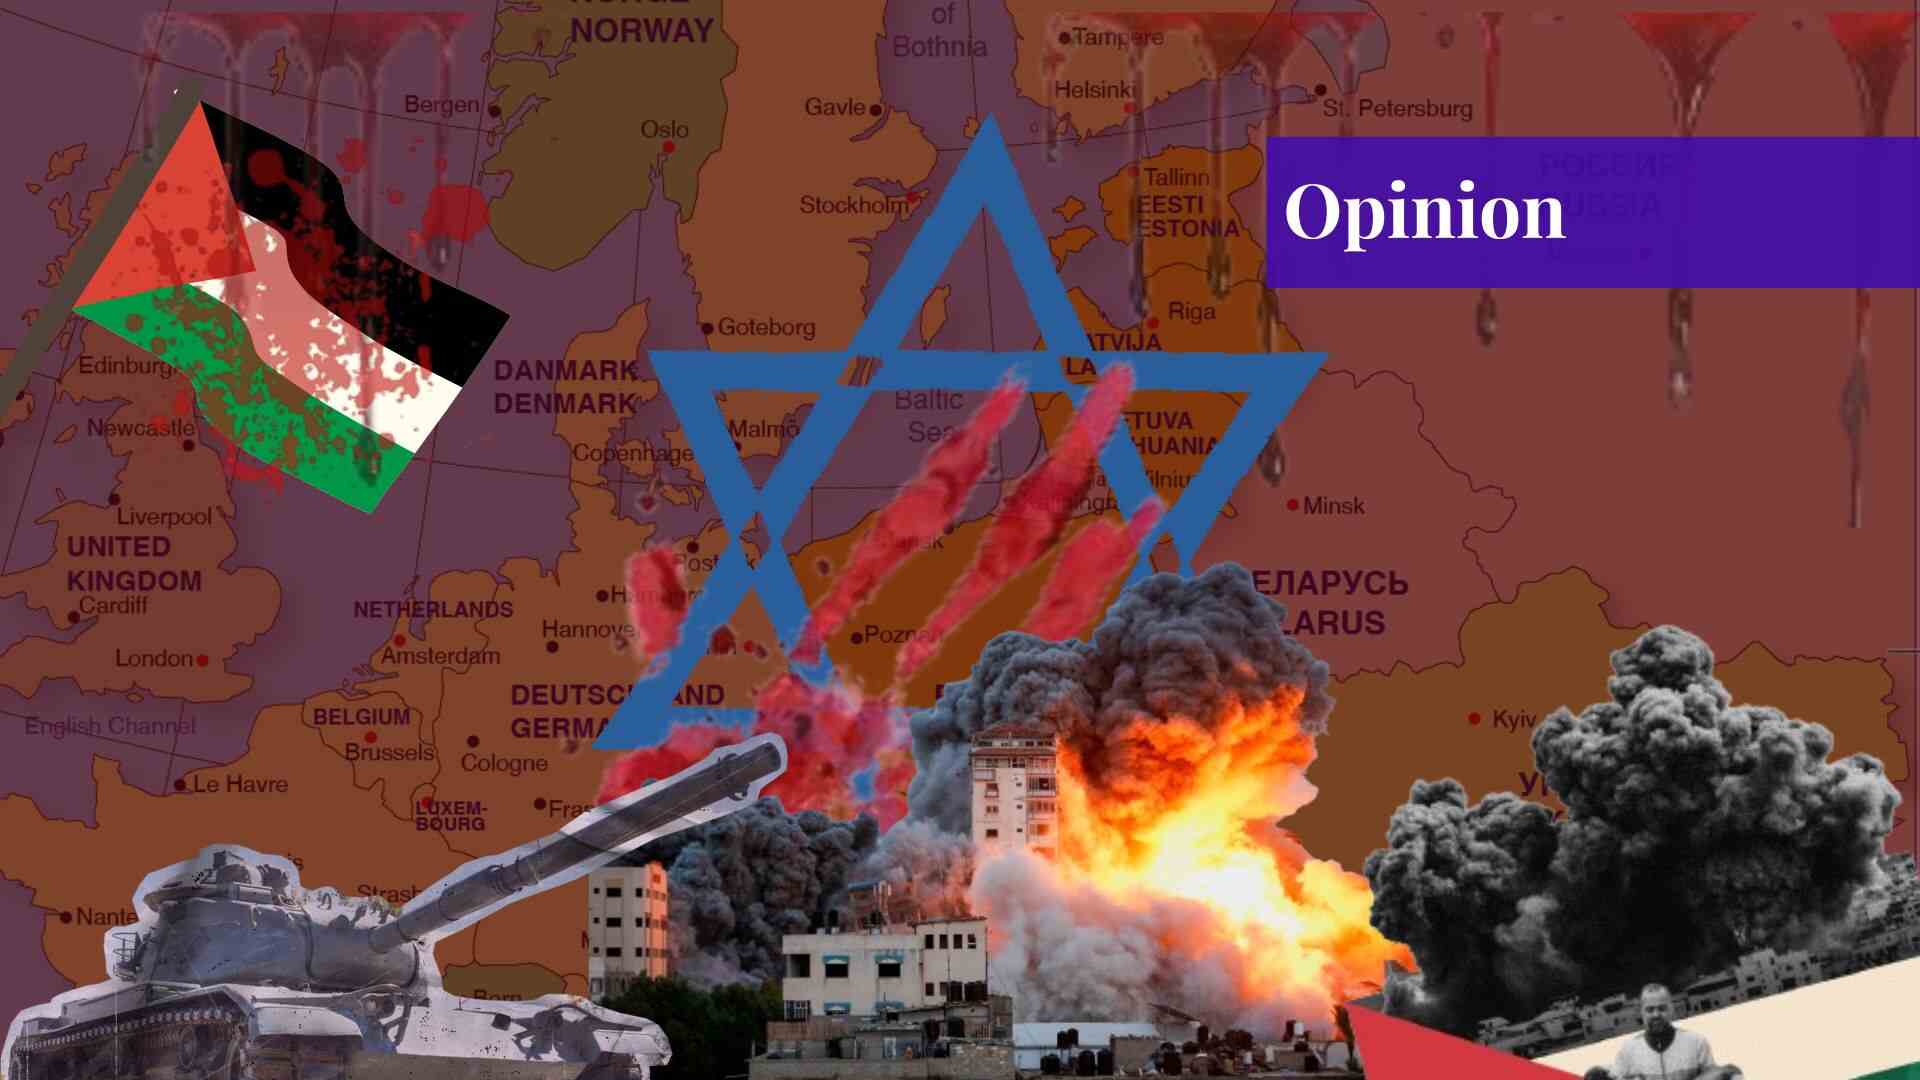 The Palestinian Conflict